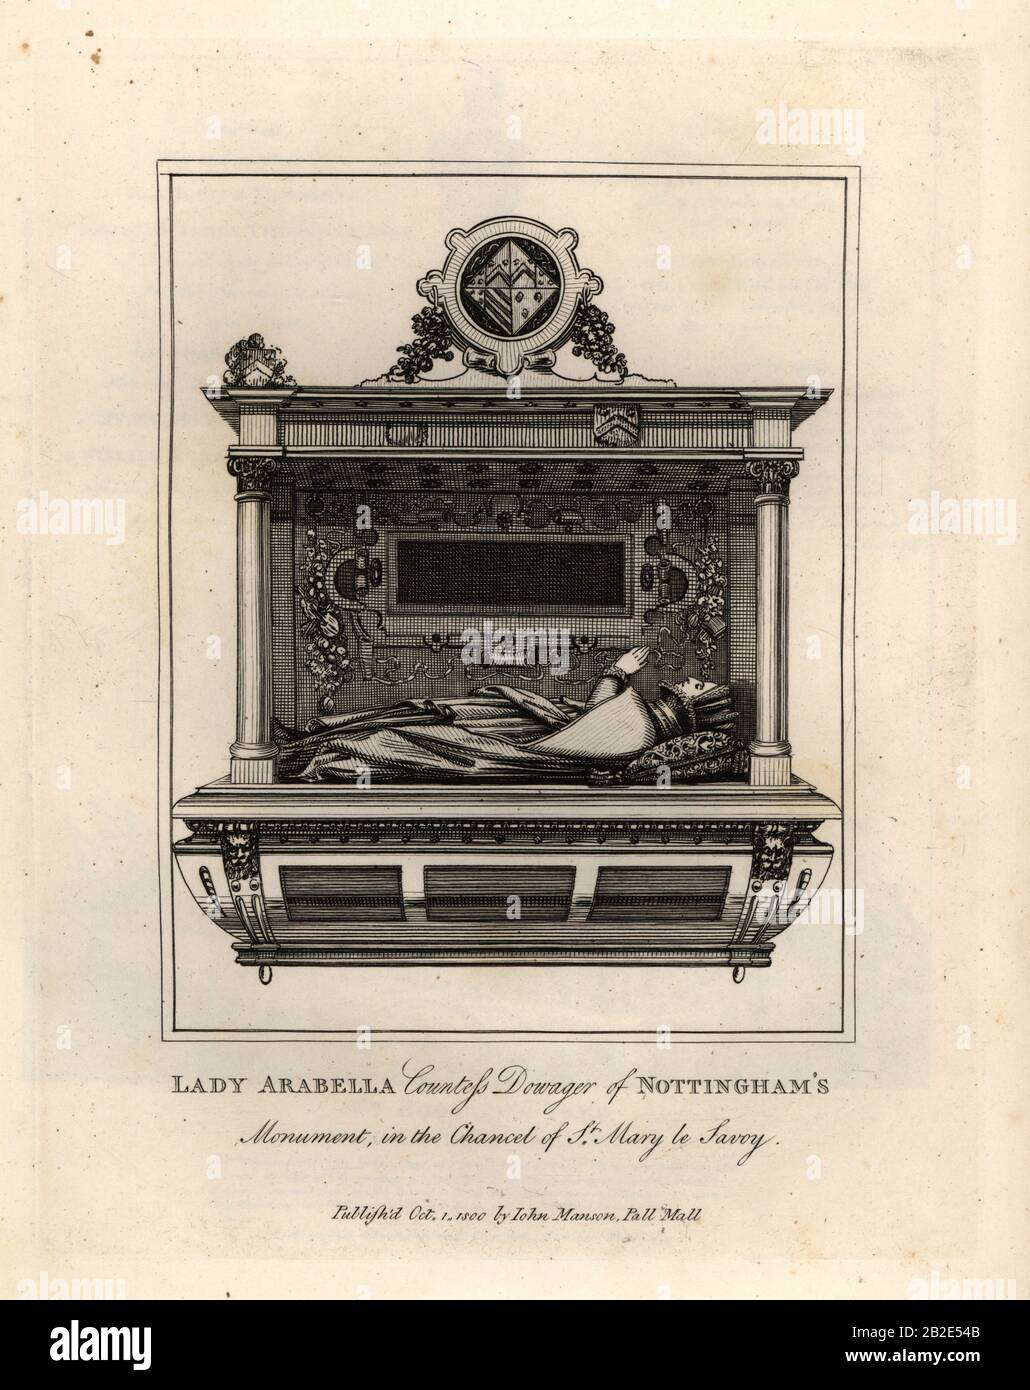 Grave effigy or Lady Arabella, Countess Dowager of Nottingham, in the chancel of St. Mary le Savoy. Copperplate engraving by John Thomas Smith after original drawings by members of the Society of Antiquaries from his J.T. Smith’s Antiquities of London and its Environs, J. Sewell, R. Folder, J. Simco, London, 1800. Stock Photo